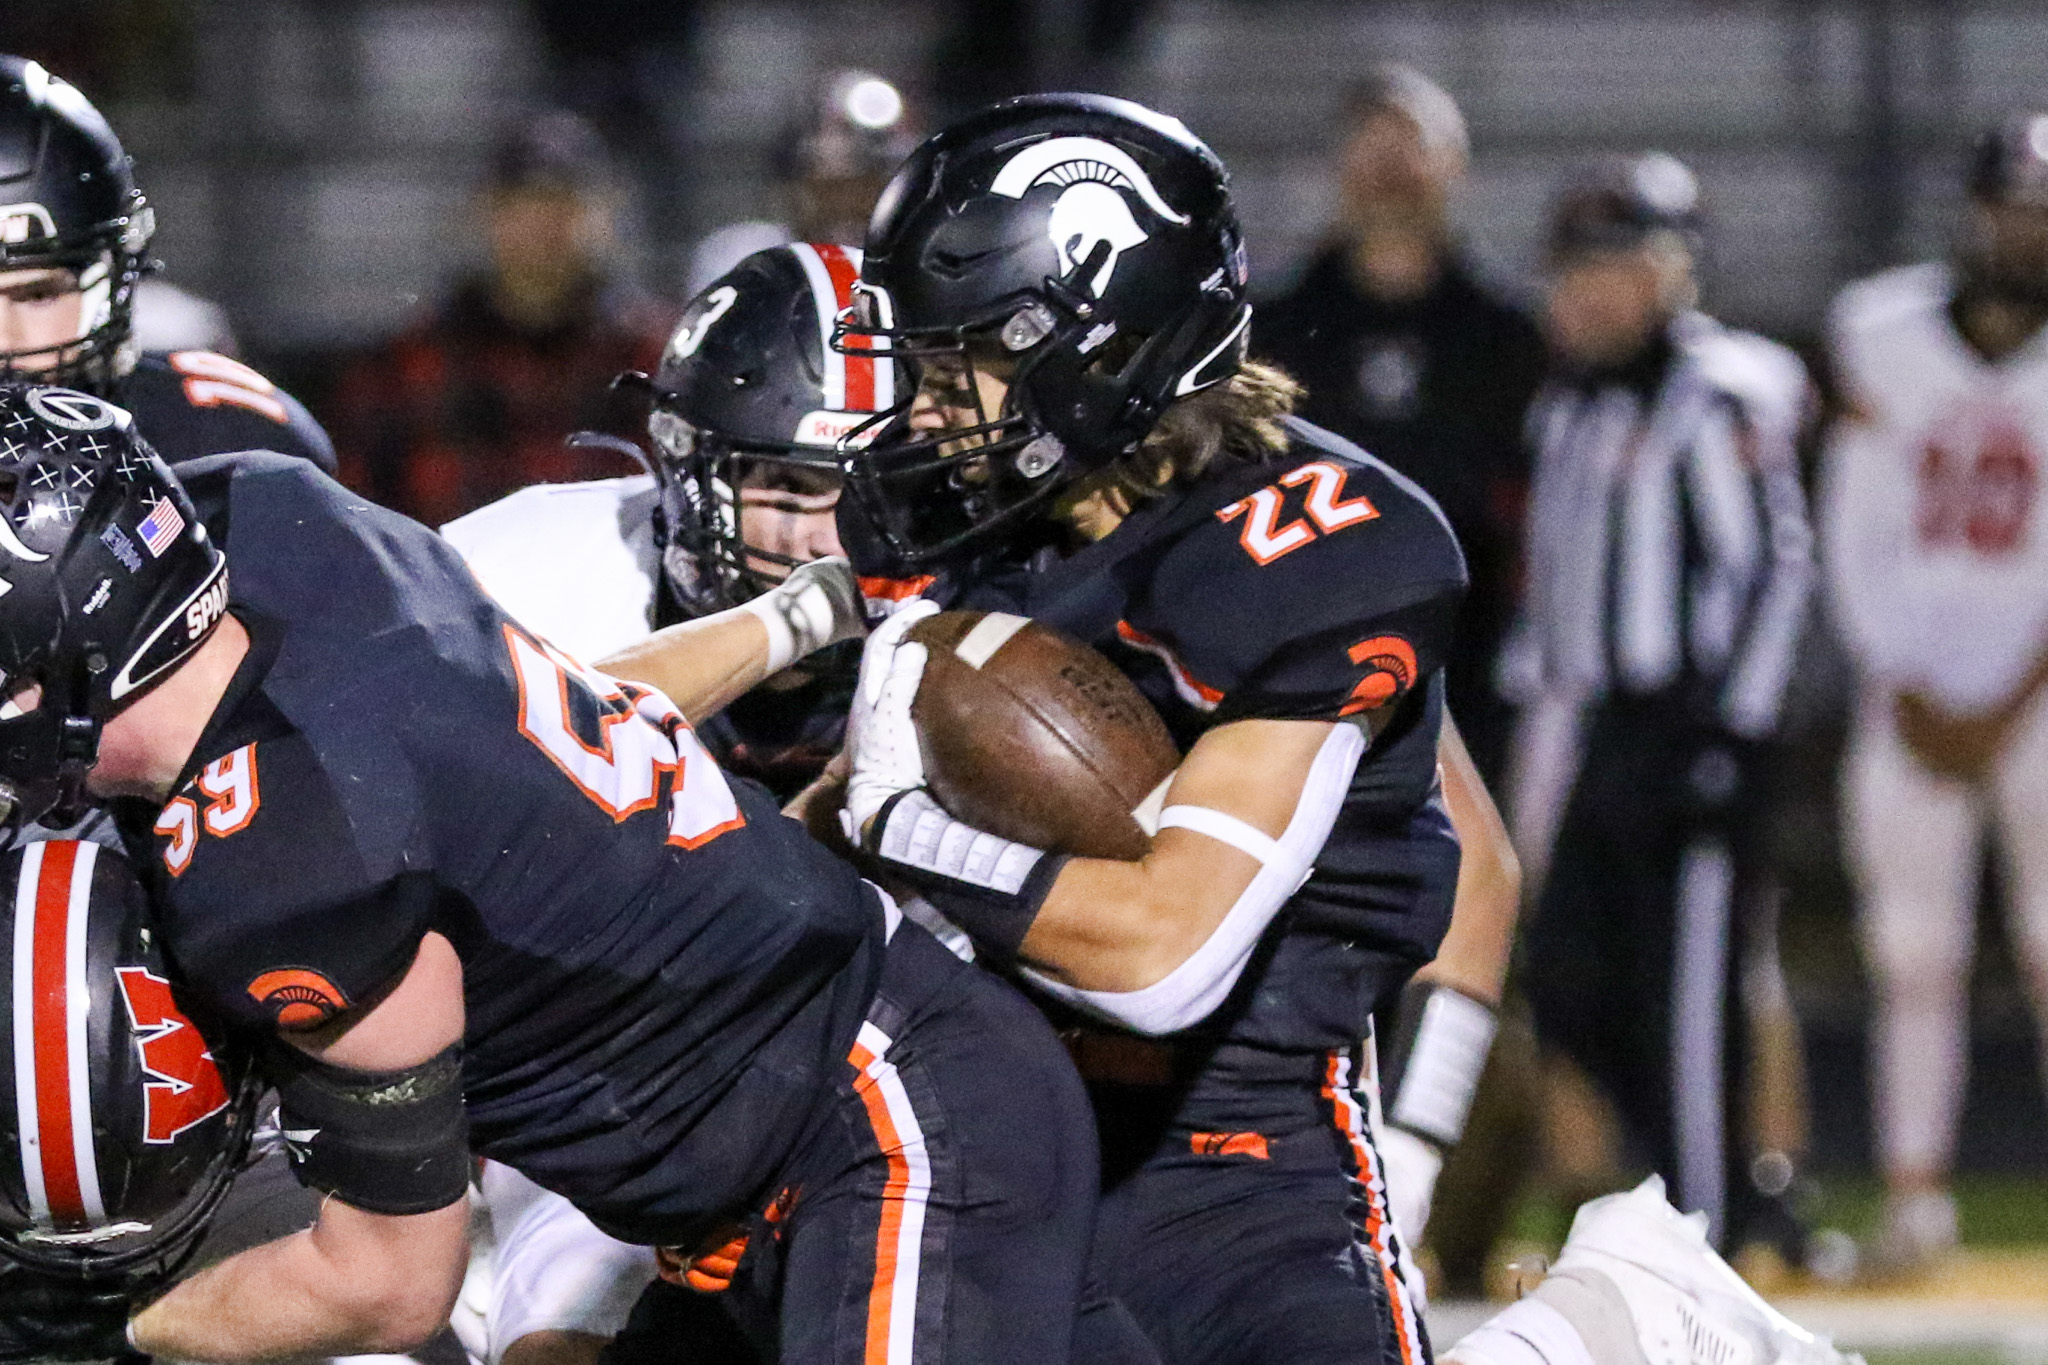 <span class="pn-tooltip pn-player-link">
        <span class="name-pointer">Scouting Reports: Williamsburg-Solon Football ’23</span>
        <span class="info-box not-prose" style="background: linear-gradient(to bottom, rgba(193,25,32, 0.95) 0%,rgba(193,25,32, 1) 100%)">
            <a href="https://prepredzone.com/2023/10/scouting-reports-williamsburg-solon-football-23/" class="link-wrap">
                                    <span class="player-img"><img src="https://prepredzone.com/wp-content/uploads/sites/3/2023/10/137A2306.jpg?w=150&h=150&crop=1" alt="Scouting Reports: Williamsburg-Solon Football ’23"></span>
                
                <span class="player-details">
                    <span class="first-name">Scouting</span>
                    <span class="last-name">Reports: Williamsburg-Solon Football ’23</span>
                    <span class="measurables">
                                            </span>
                                    </span>
                <span class="player-rank">
                                                        </span>
                                    <span class="state-abbr"></span>
                            </a>

            
        </span>
    </span>
